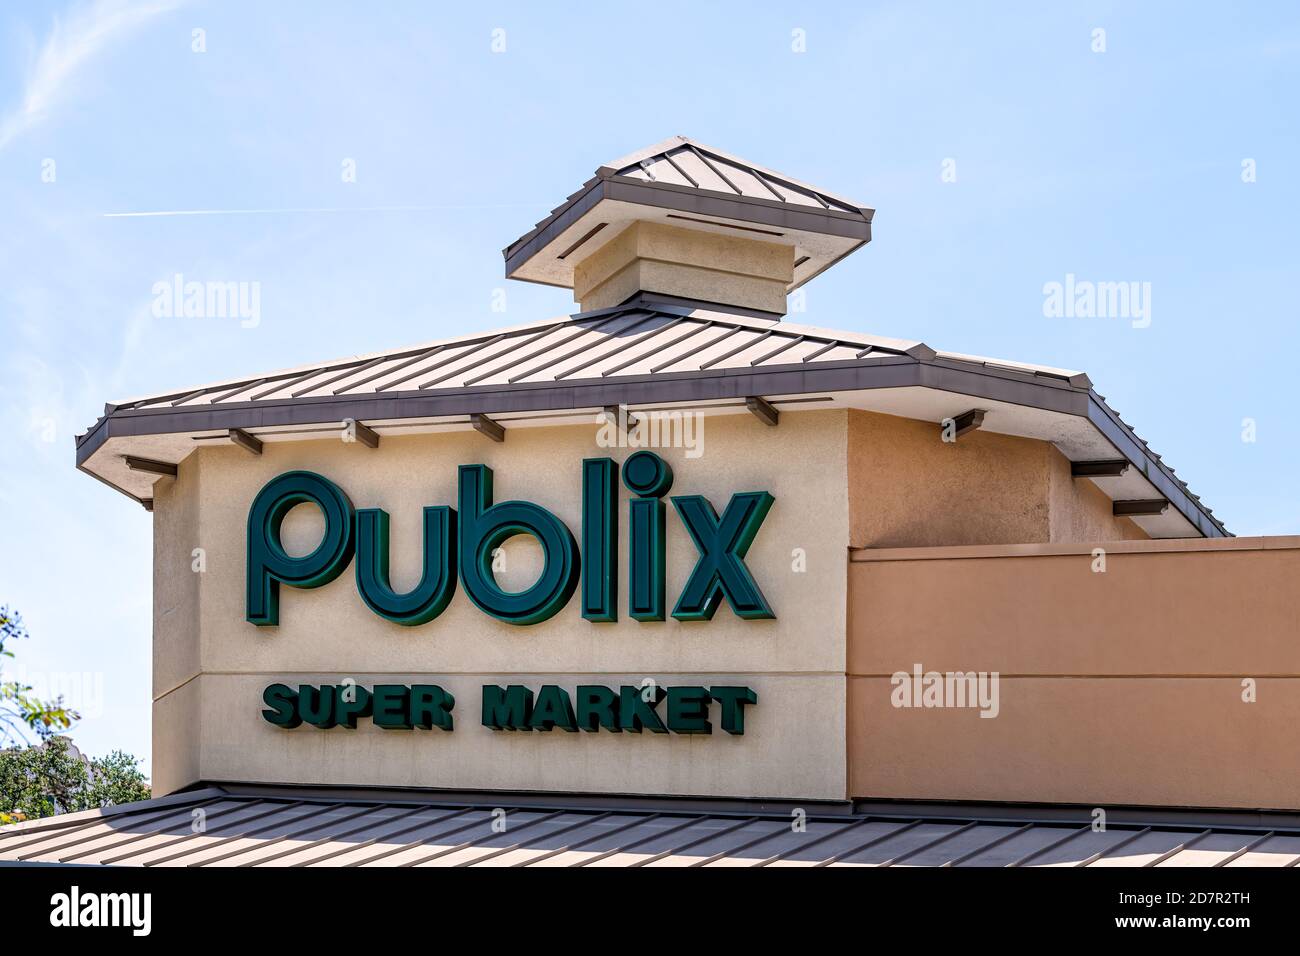 Tampa, USA - April 27, 2018: Downtown city in Florida and closeup of sign for Publix grocery store super market on building exterior Stock Photo